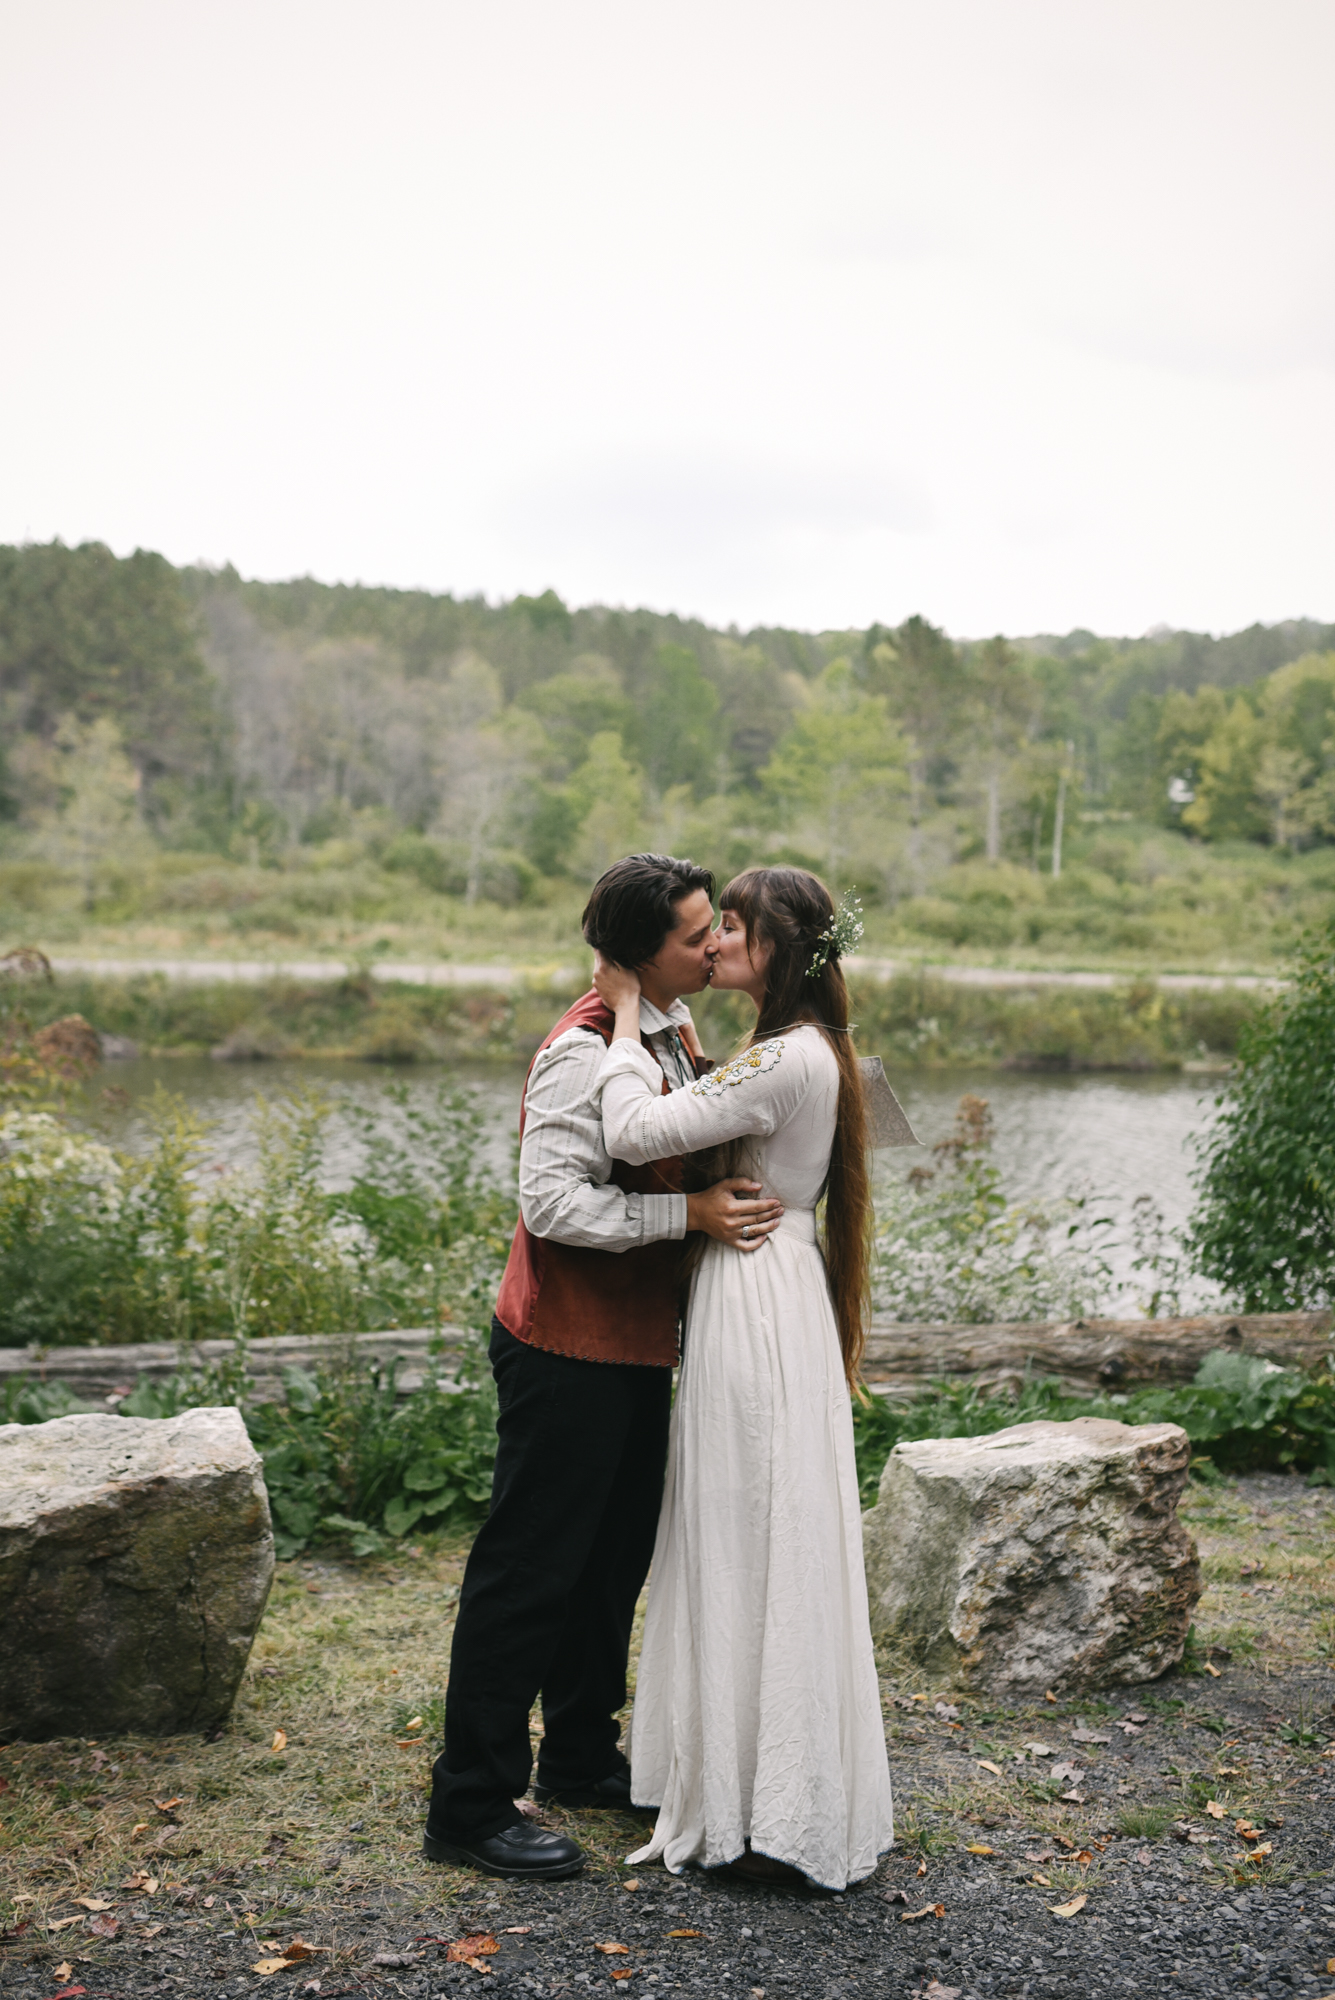  Mountain Wedding, Outdoors, Rustic, West Virginia, Maryland Wedding Photographer, DIY, Casual, bride and groom sharing first kiss, first kiss photo 